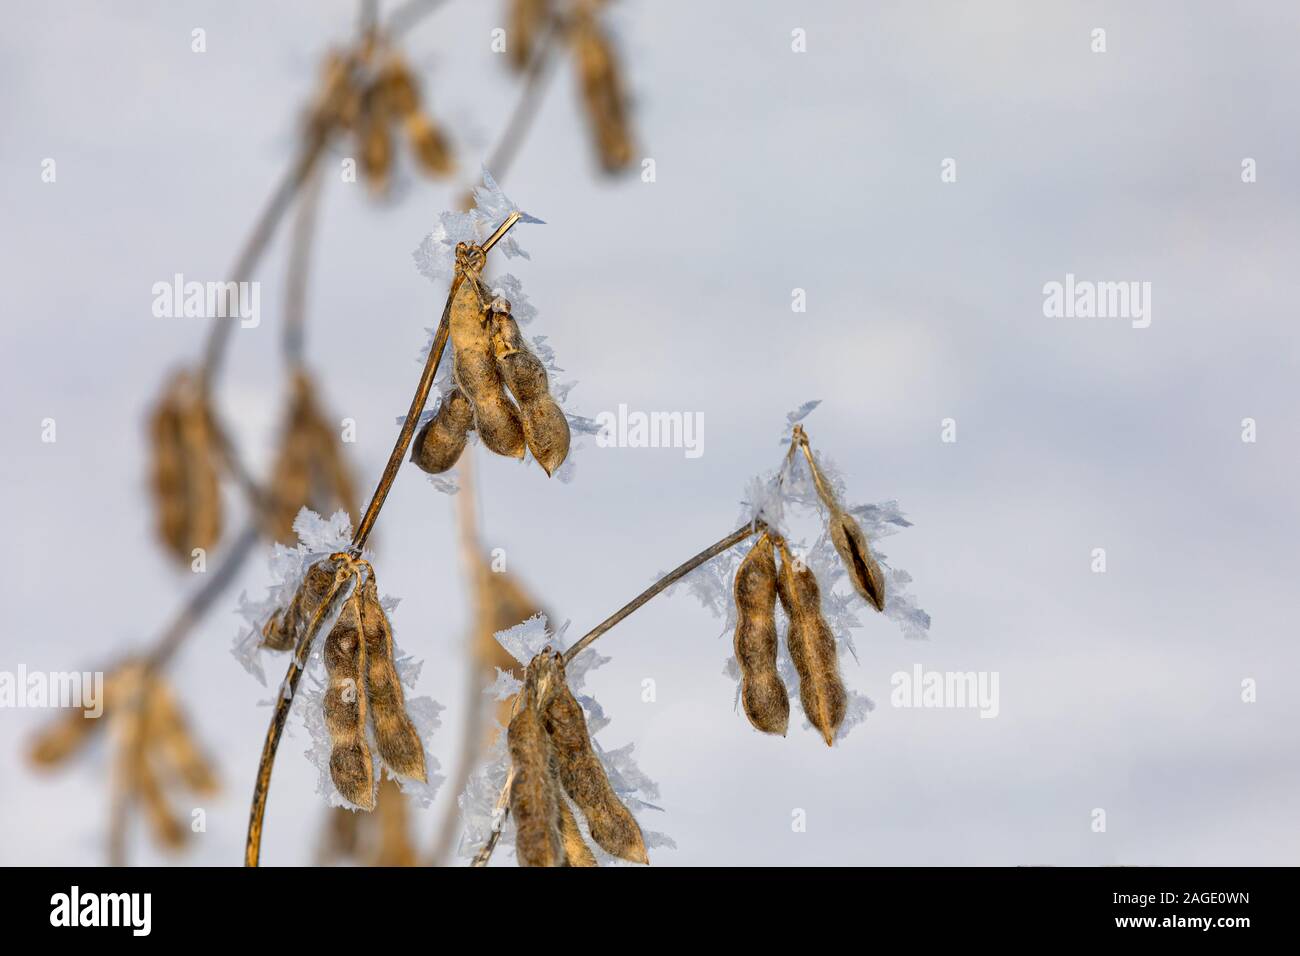 Closeup of standing soybean plants in snow covered soybean farm field. Snowflakes and ice crystals on brown seed pods. Delayed crop harvest in 2019 Stock Photo